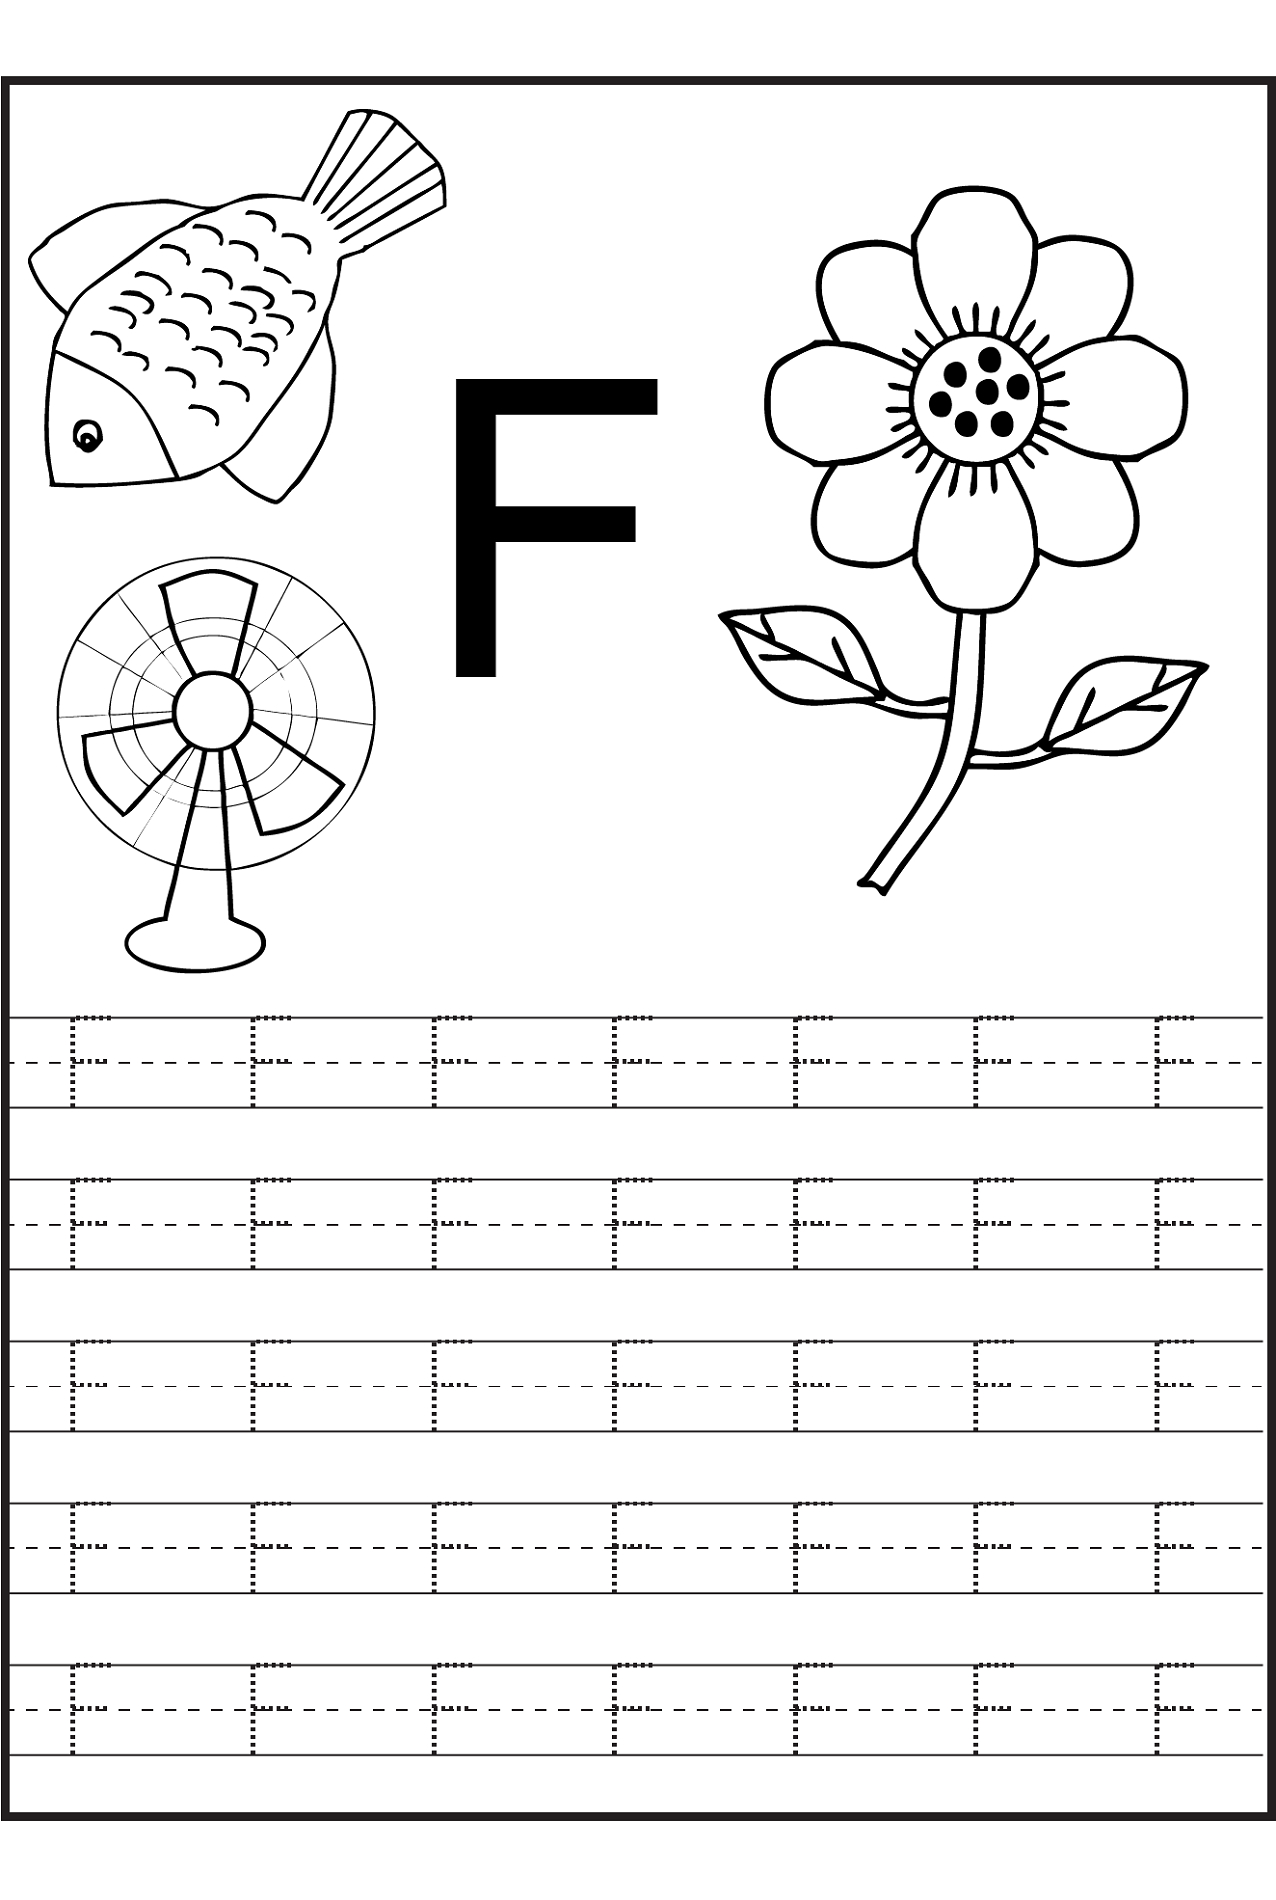 Worksheets : Writing Alphabet Letters Worksheets Chinese for Tracing Letter I Worksheets Free